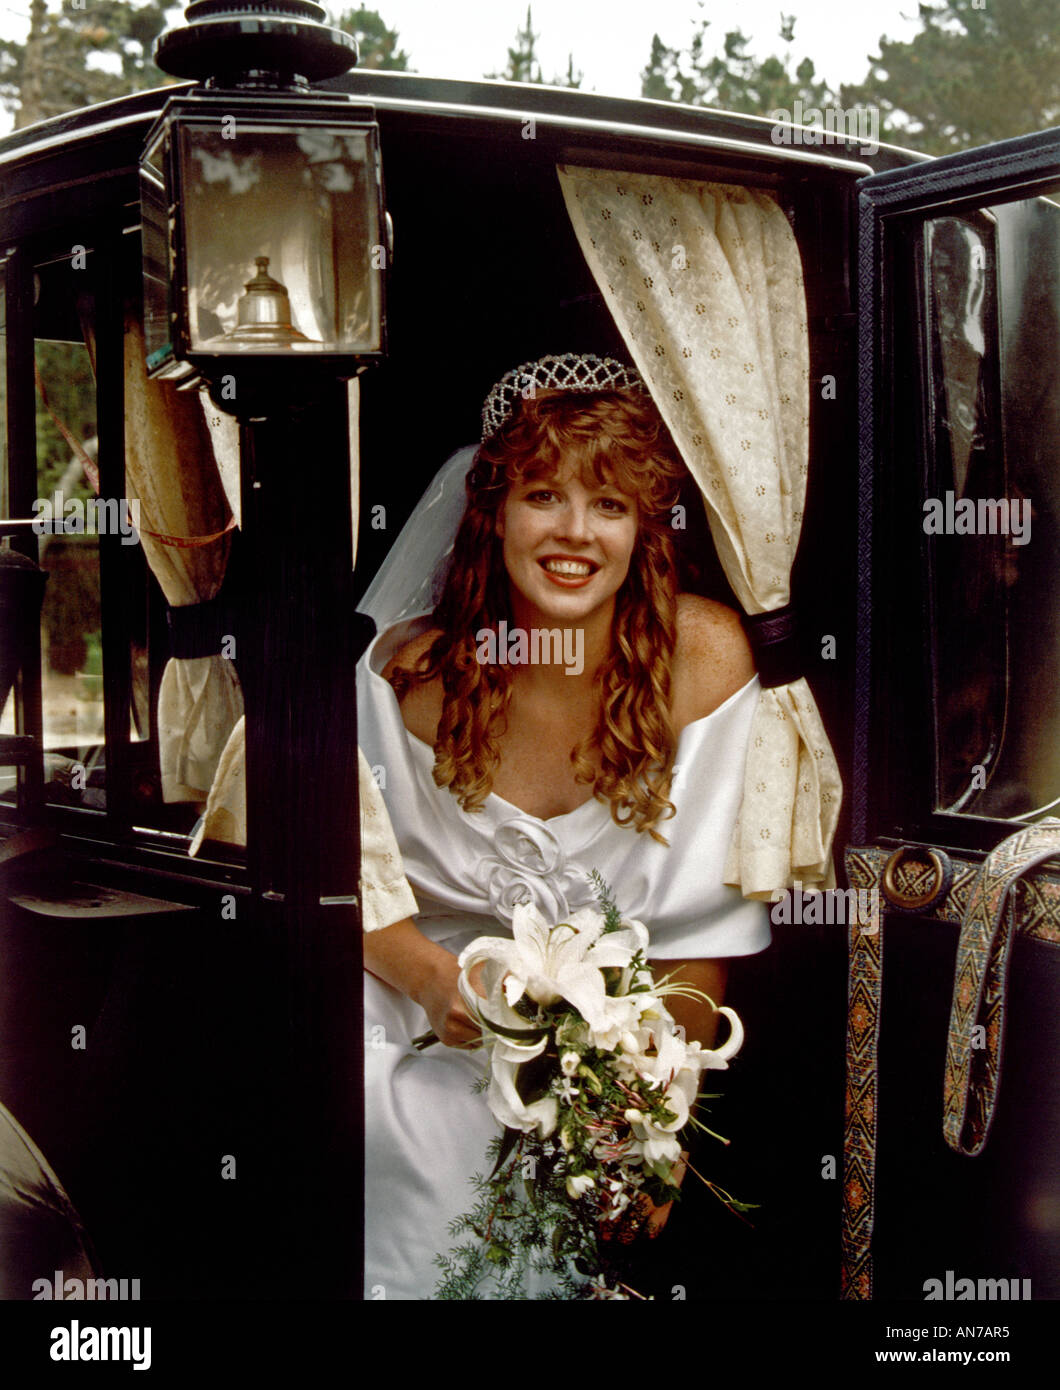 Bride in a horse carriage MODEL RELEASED Stock Photo